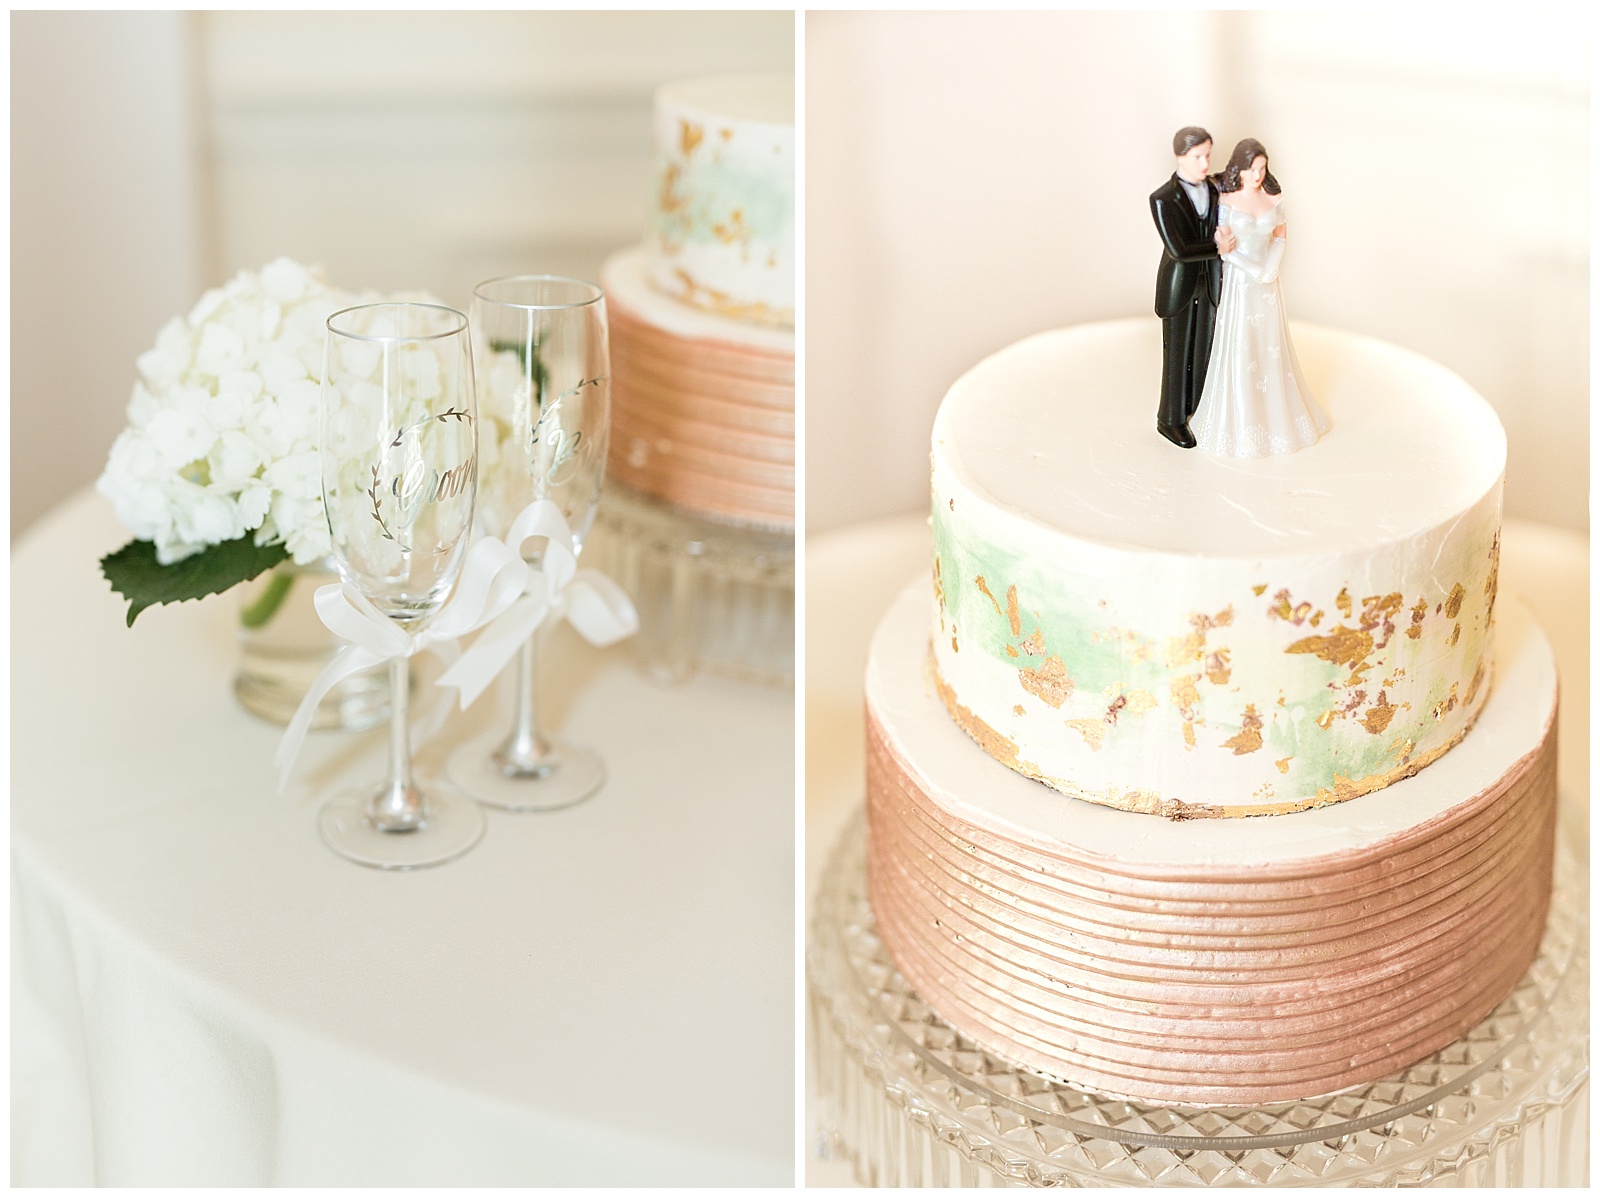 Cake detail images with gold foil and bride and groom glasses and figurine